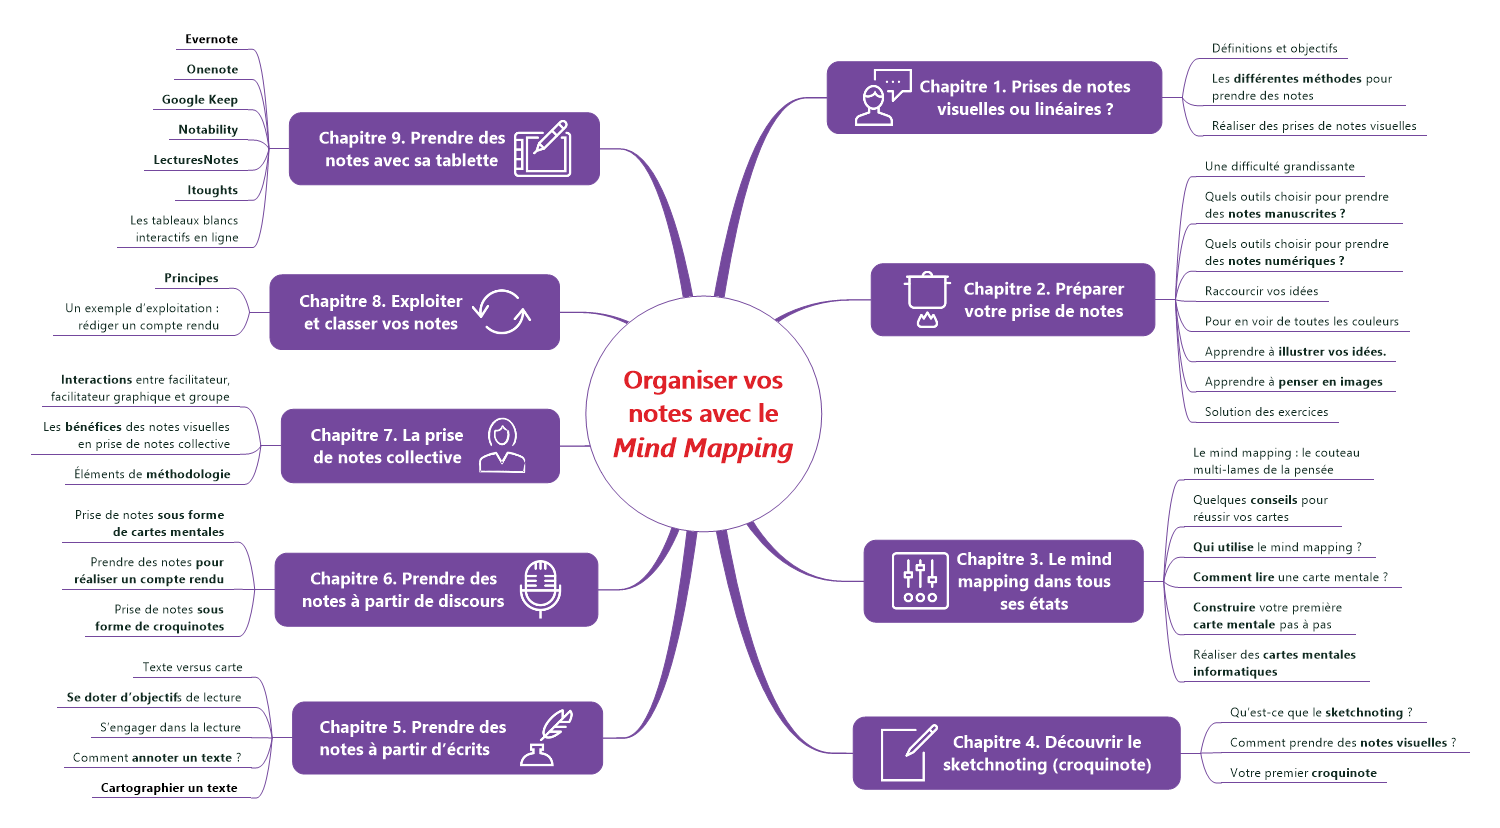 organiser-vos-notes-avec-le-mind-mapping